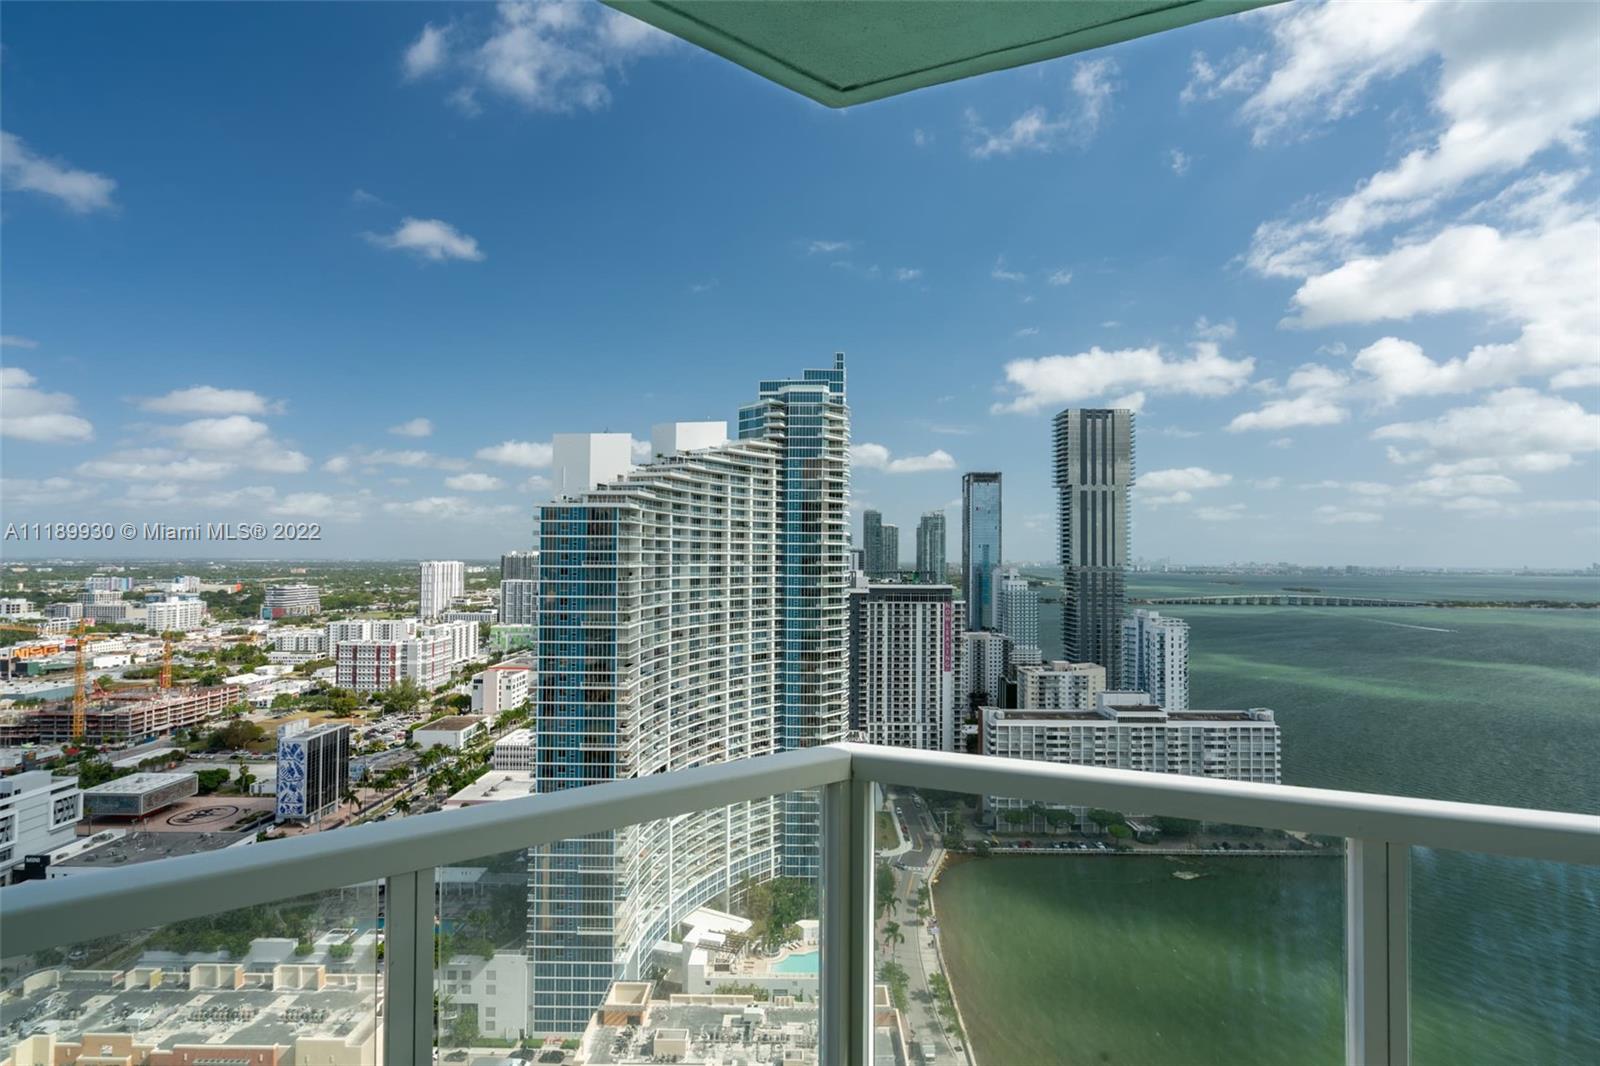 Excellent 3 Bedroom and 3 baths corner unit in sought after Quantum on the Bay. The unit has direct bay views and beautiful city views. European style kitchen with stainless steel appliances. Great amenities including 2 pools, spectacular fitness center and movie theatre. Close to South Beach, Midtown, Wynwood, Design District and Downtown Miami.